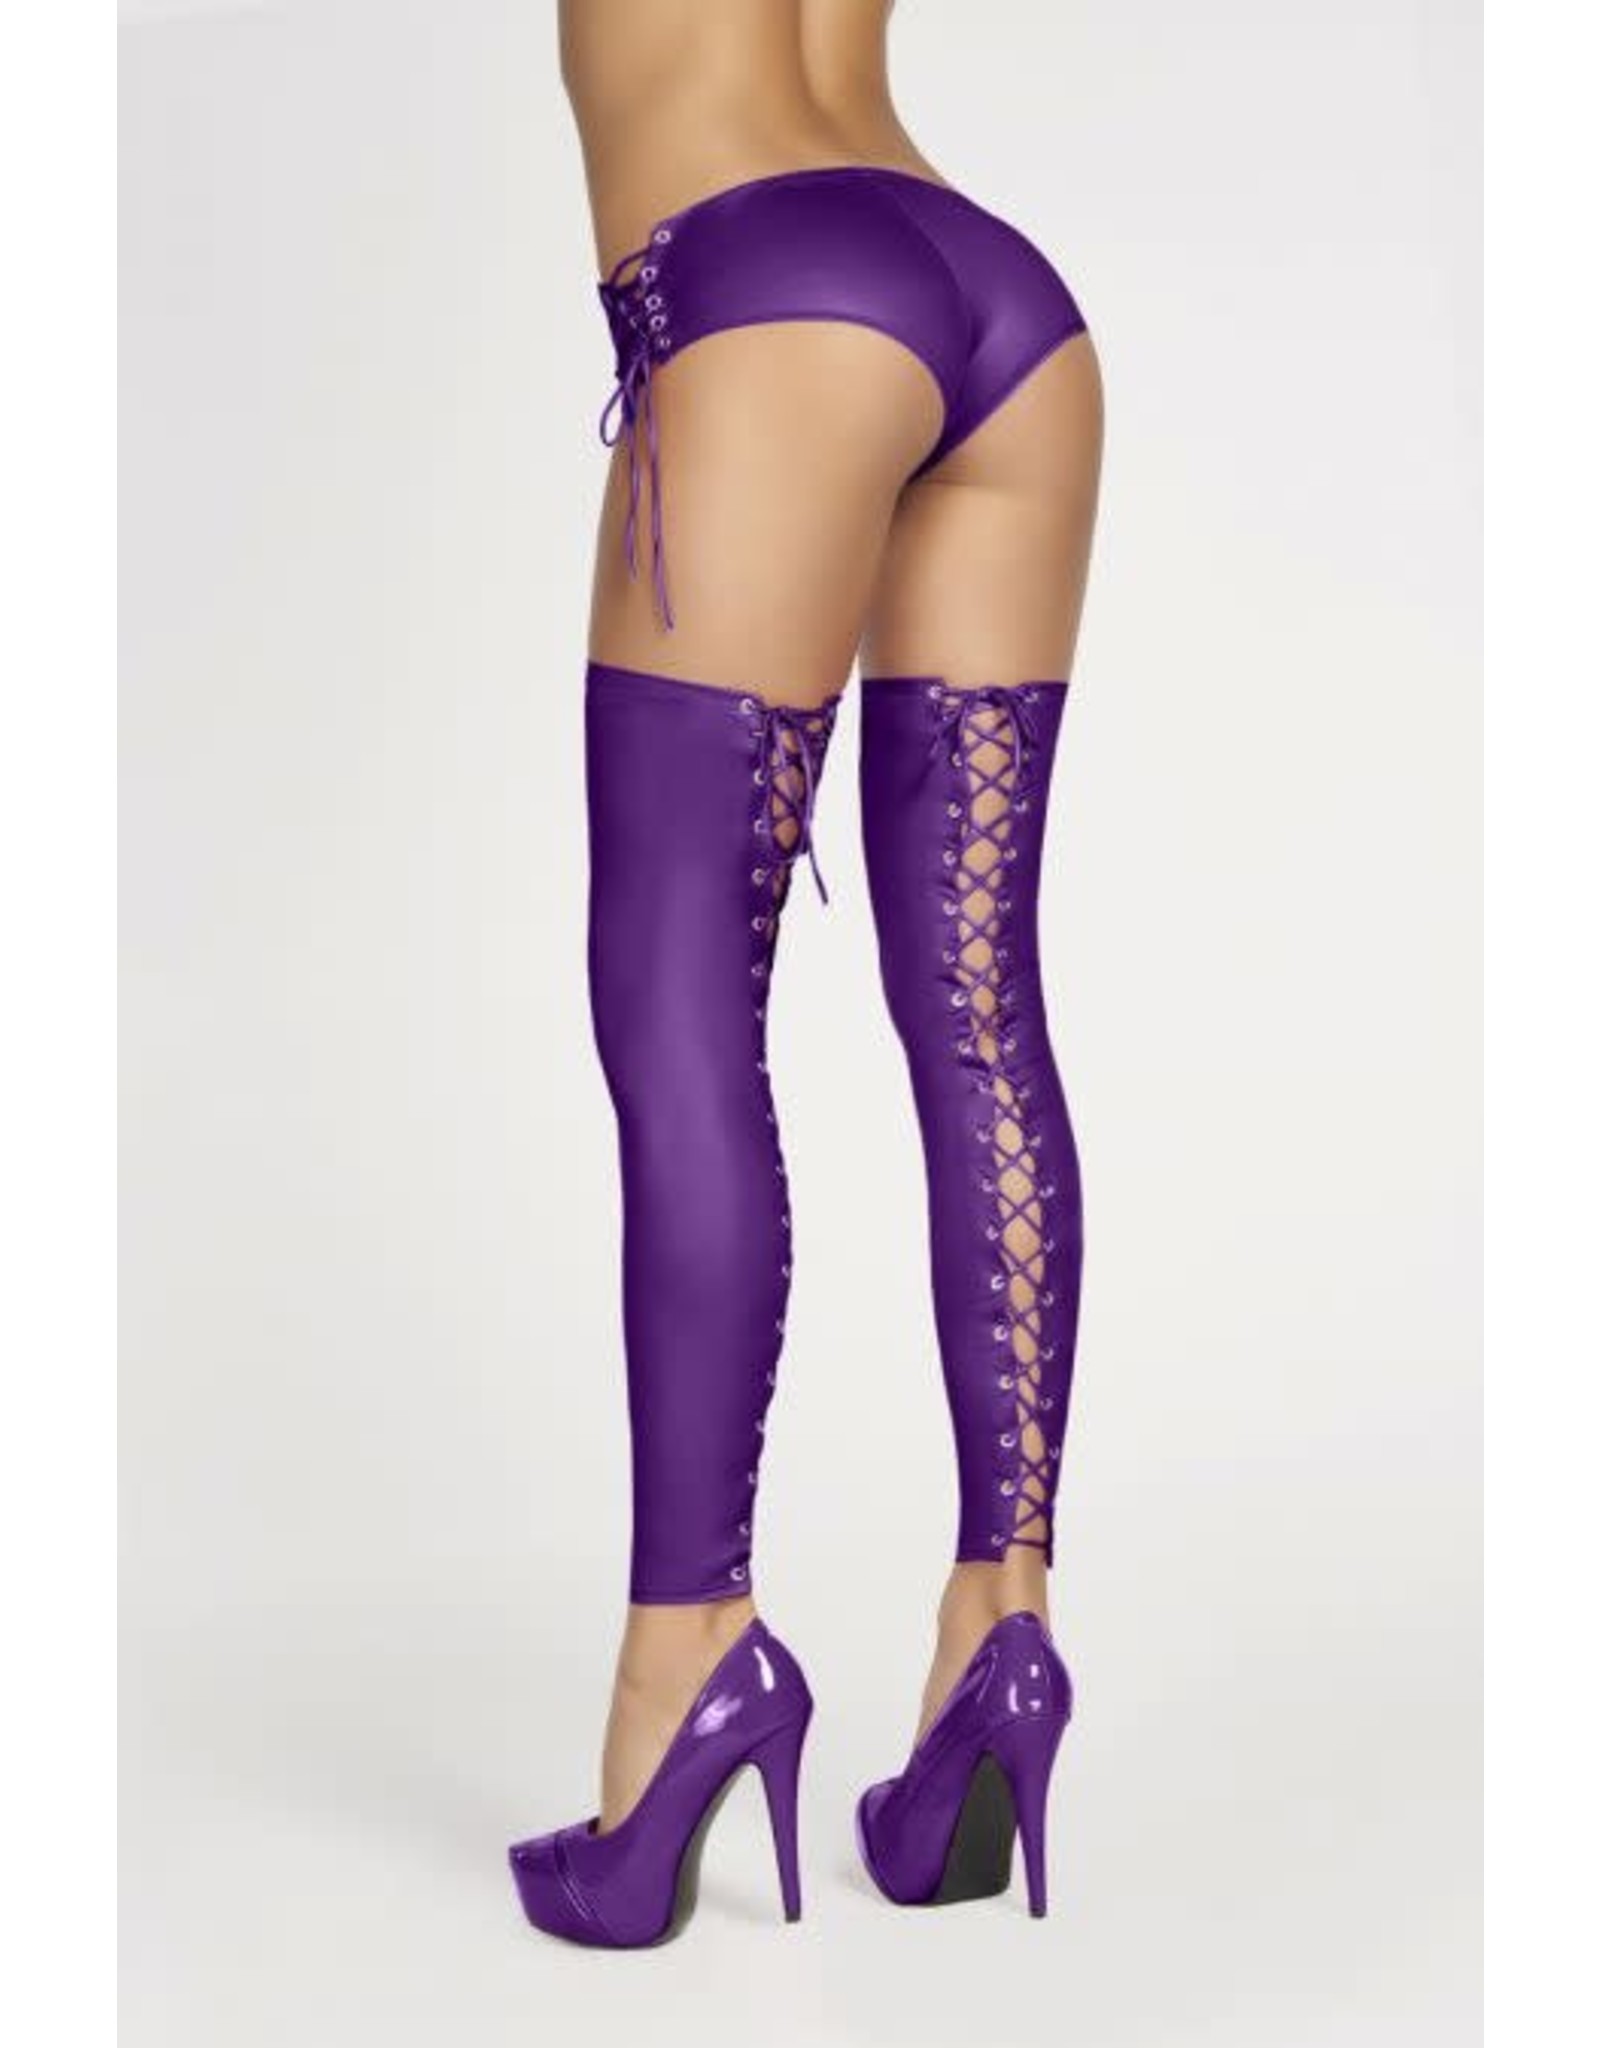 7 HEAVEN 7 HEAVEN - SEXY STOCKINGS WITH LACING AT THE BACK - S/M